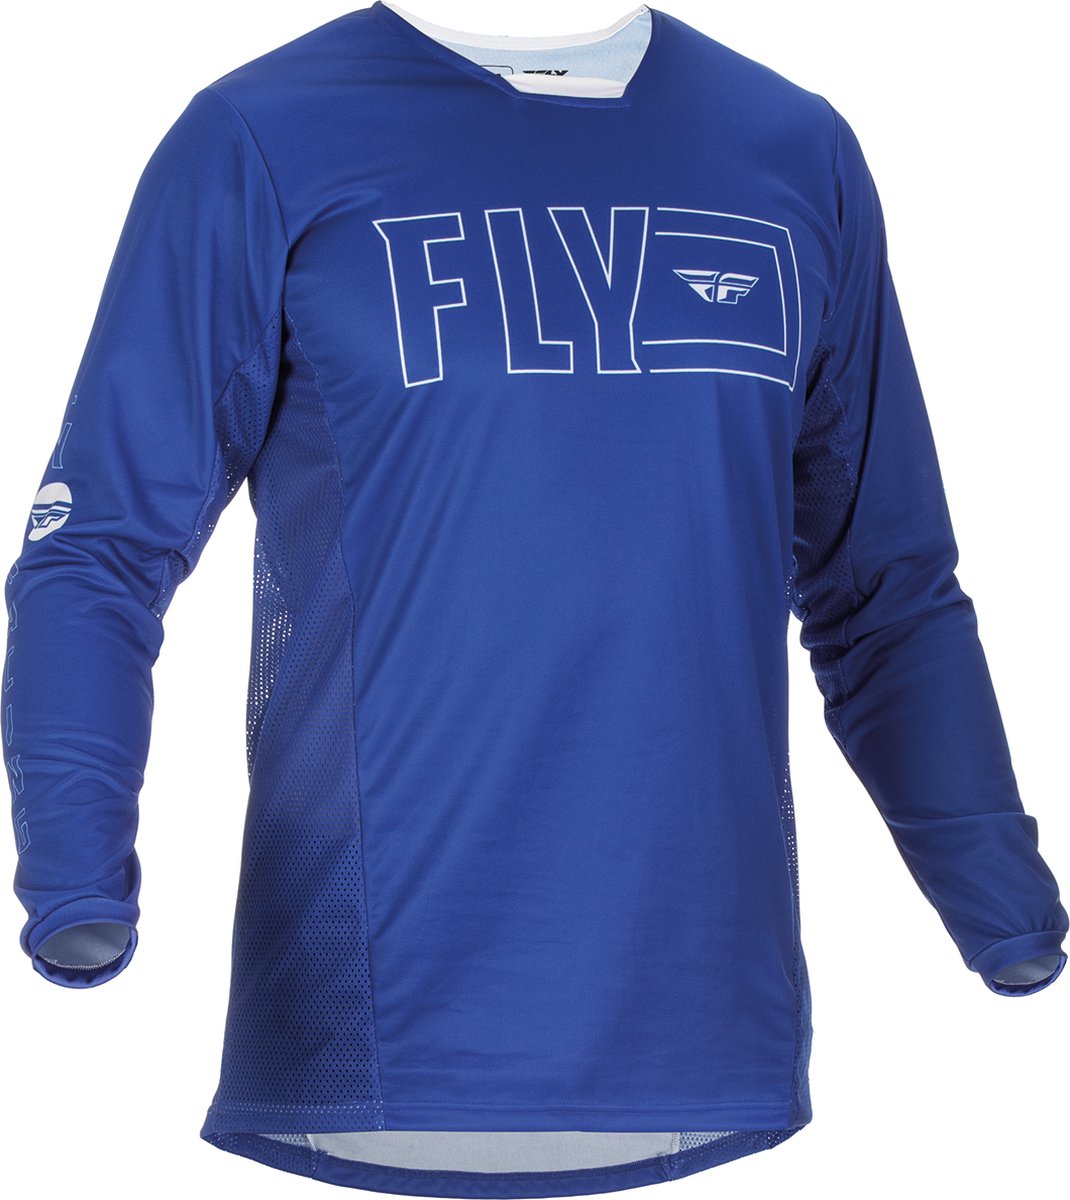 FLY Racing Kinetic Fuel Jersey Blue White M